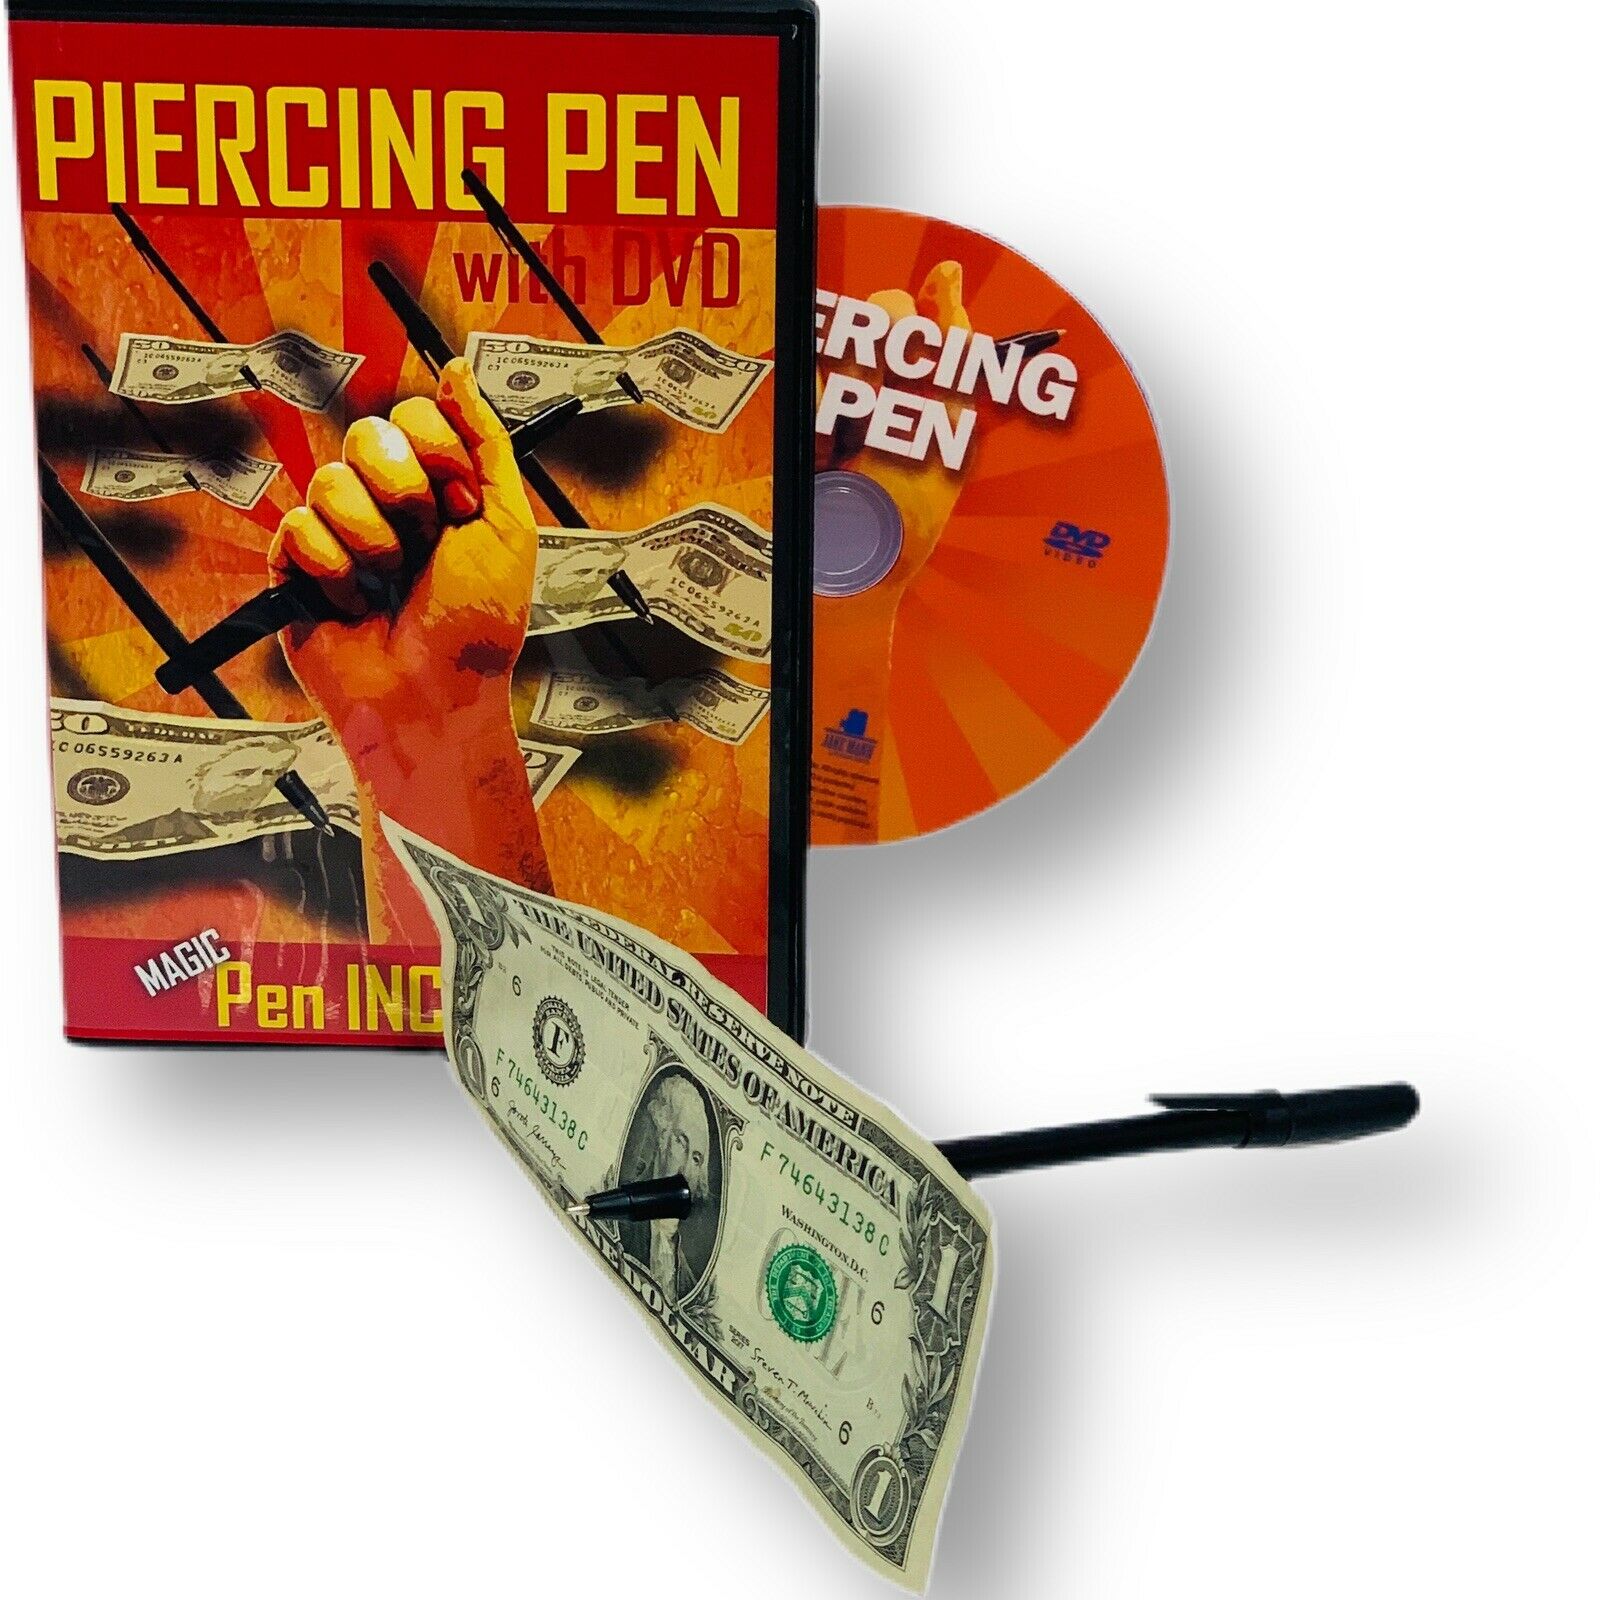 Piercing-Pen-DVD-and-gimmick